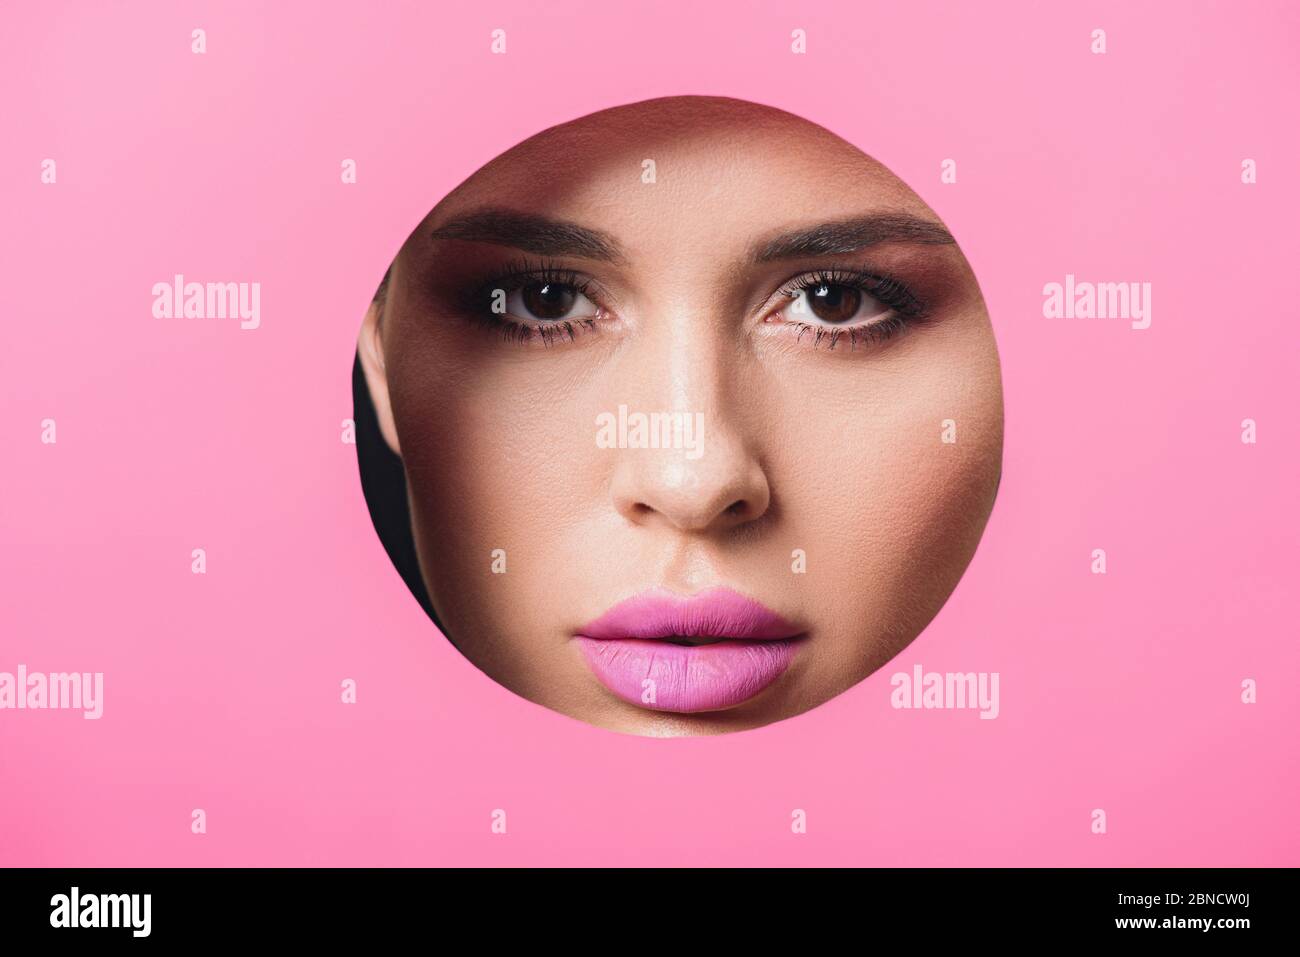 Woman with smoky eyes and pink lips looking at camera across hole in paper Stock Photo